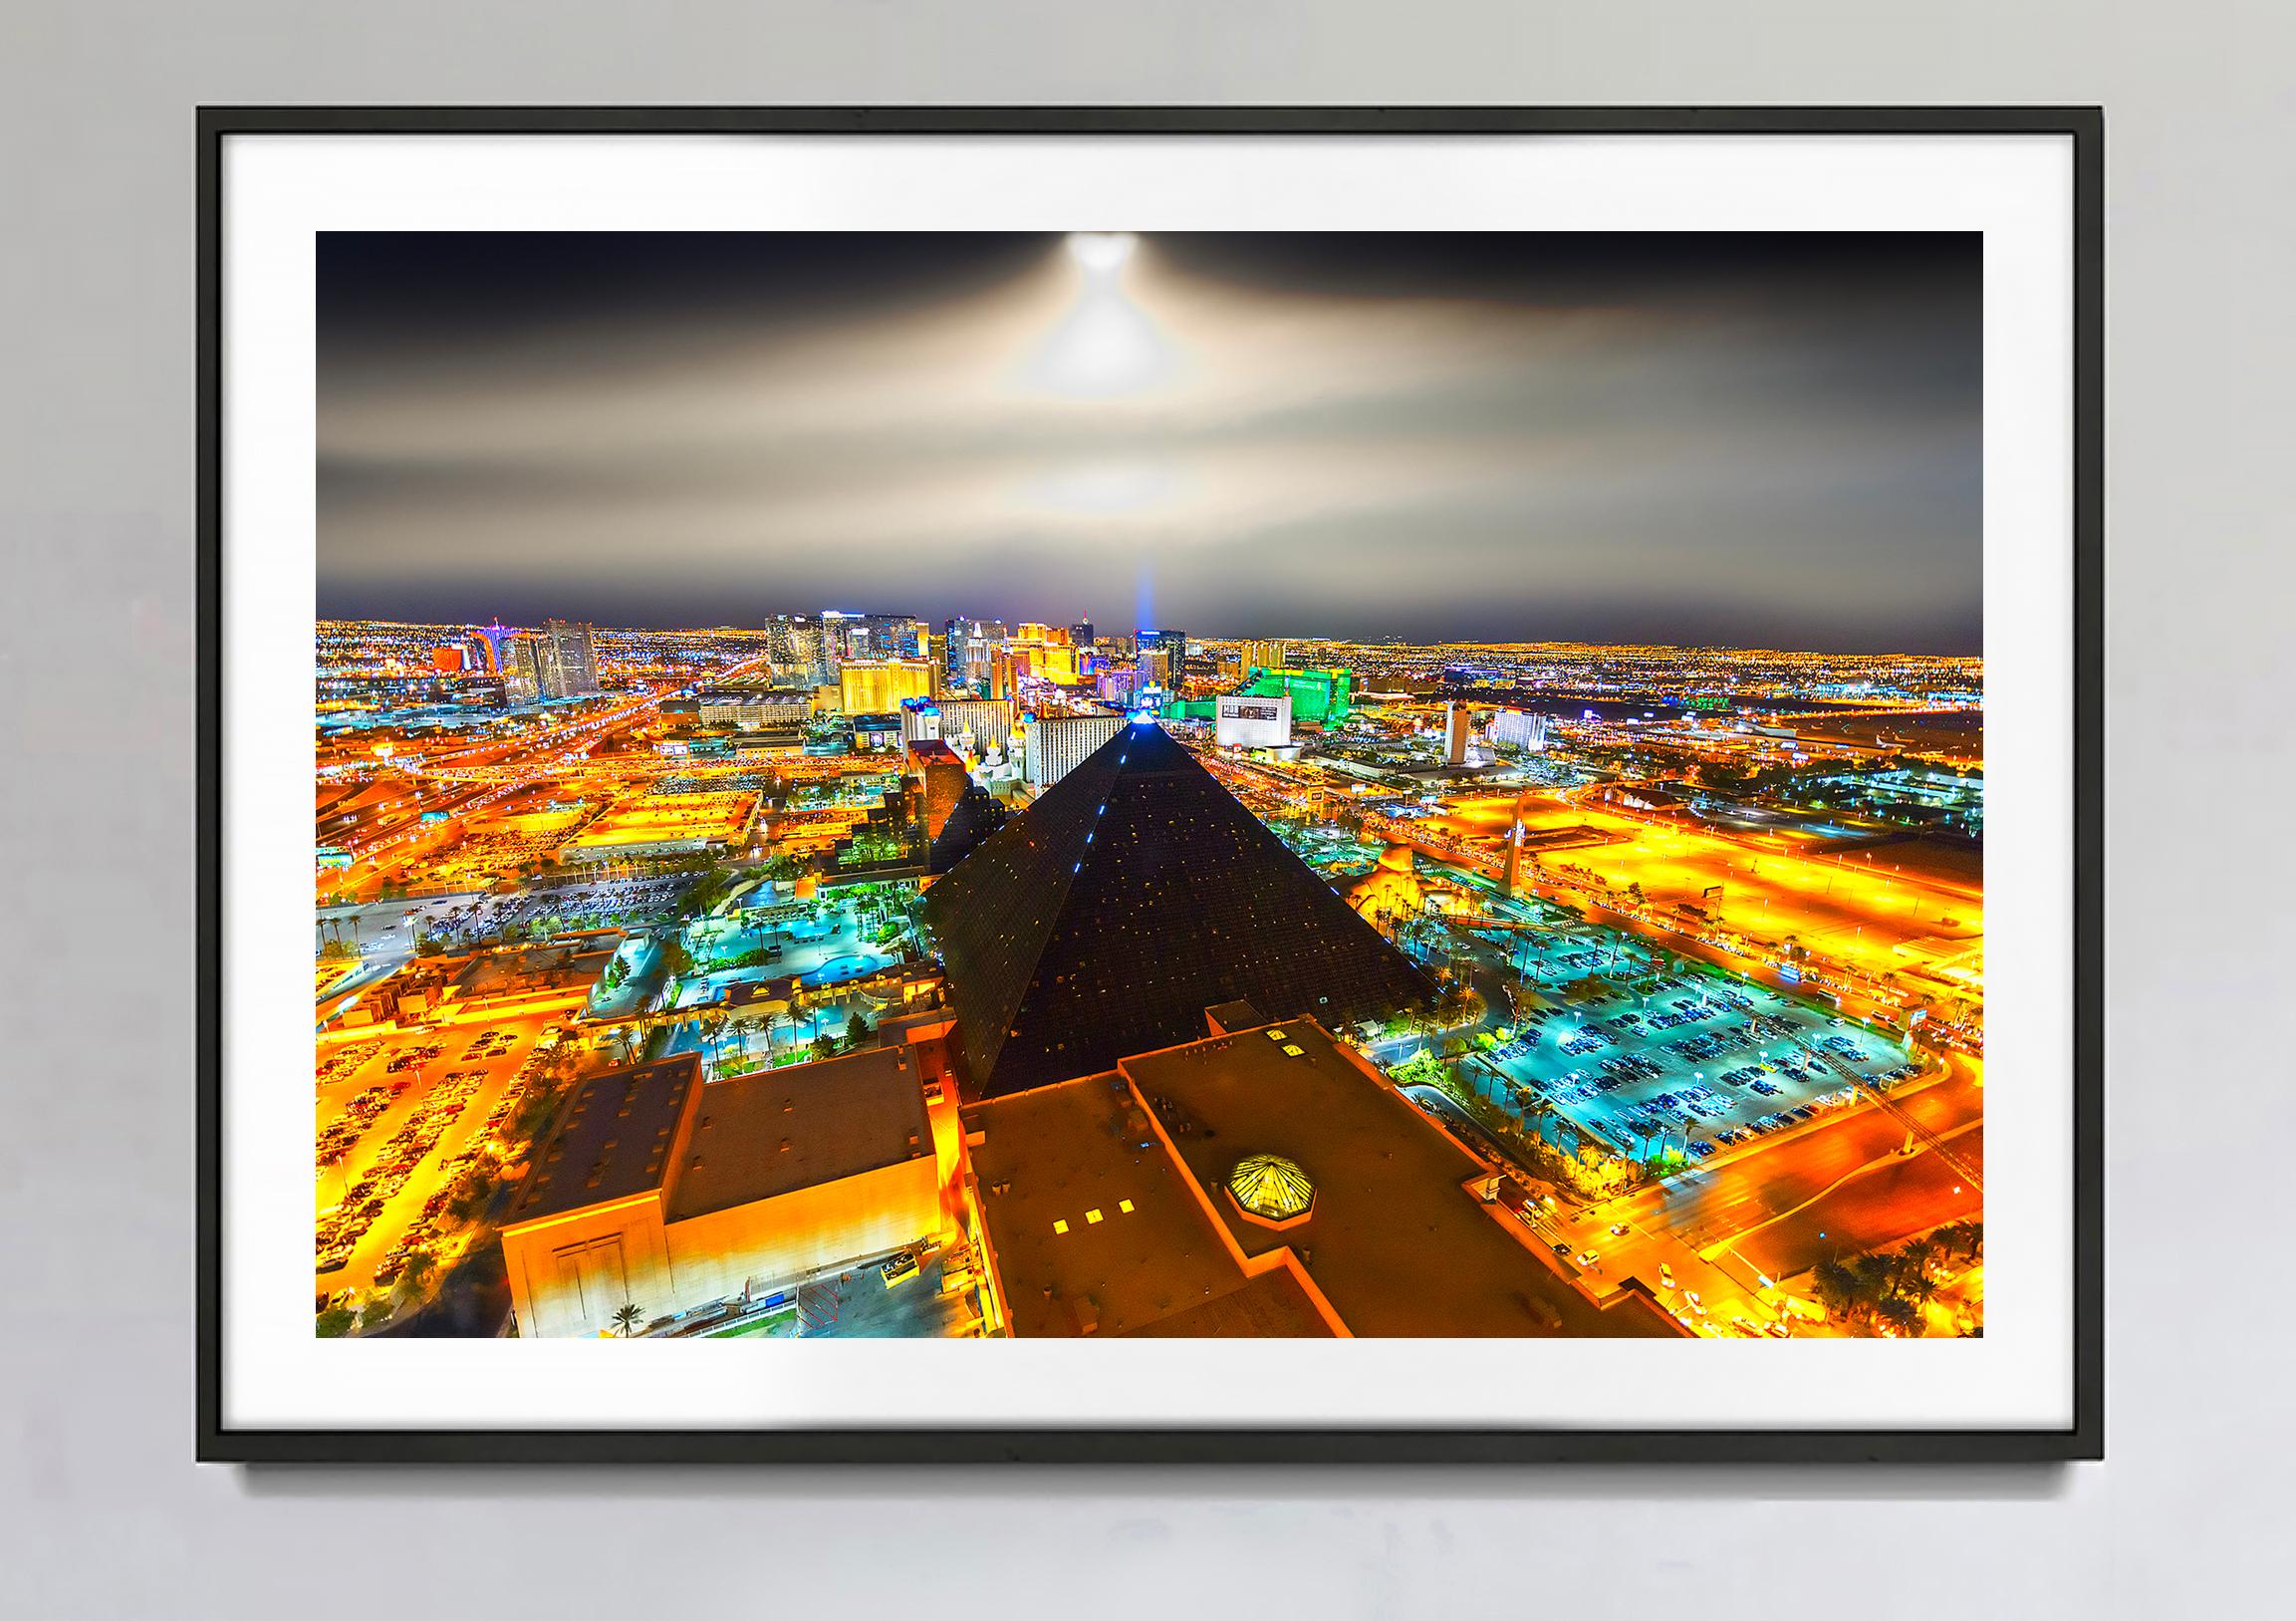 Elevated View Of Las Vegas At Night With Moonlit Sky - Photograph by Mitchell Funk